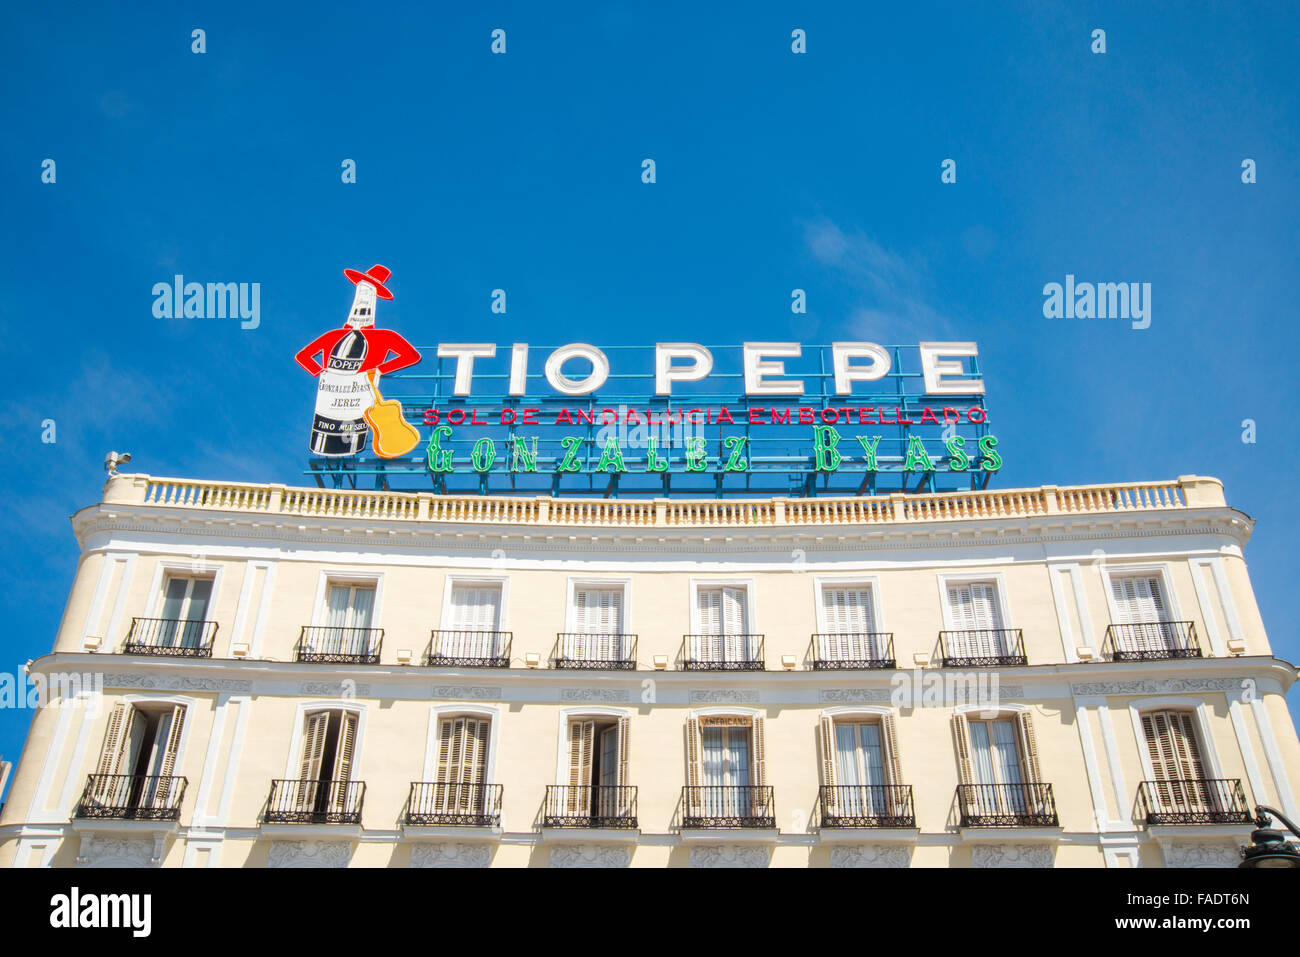 Tio Pepe neon sign on its new location. Puerta del Sol, Madrid, Spain. Stock Photo